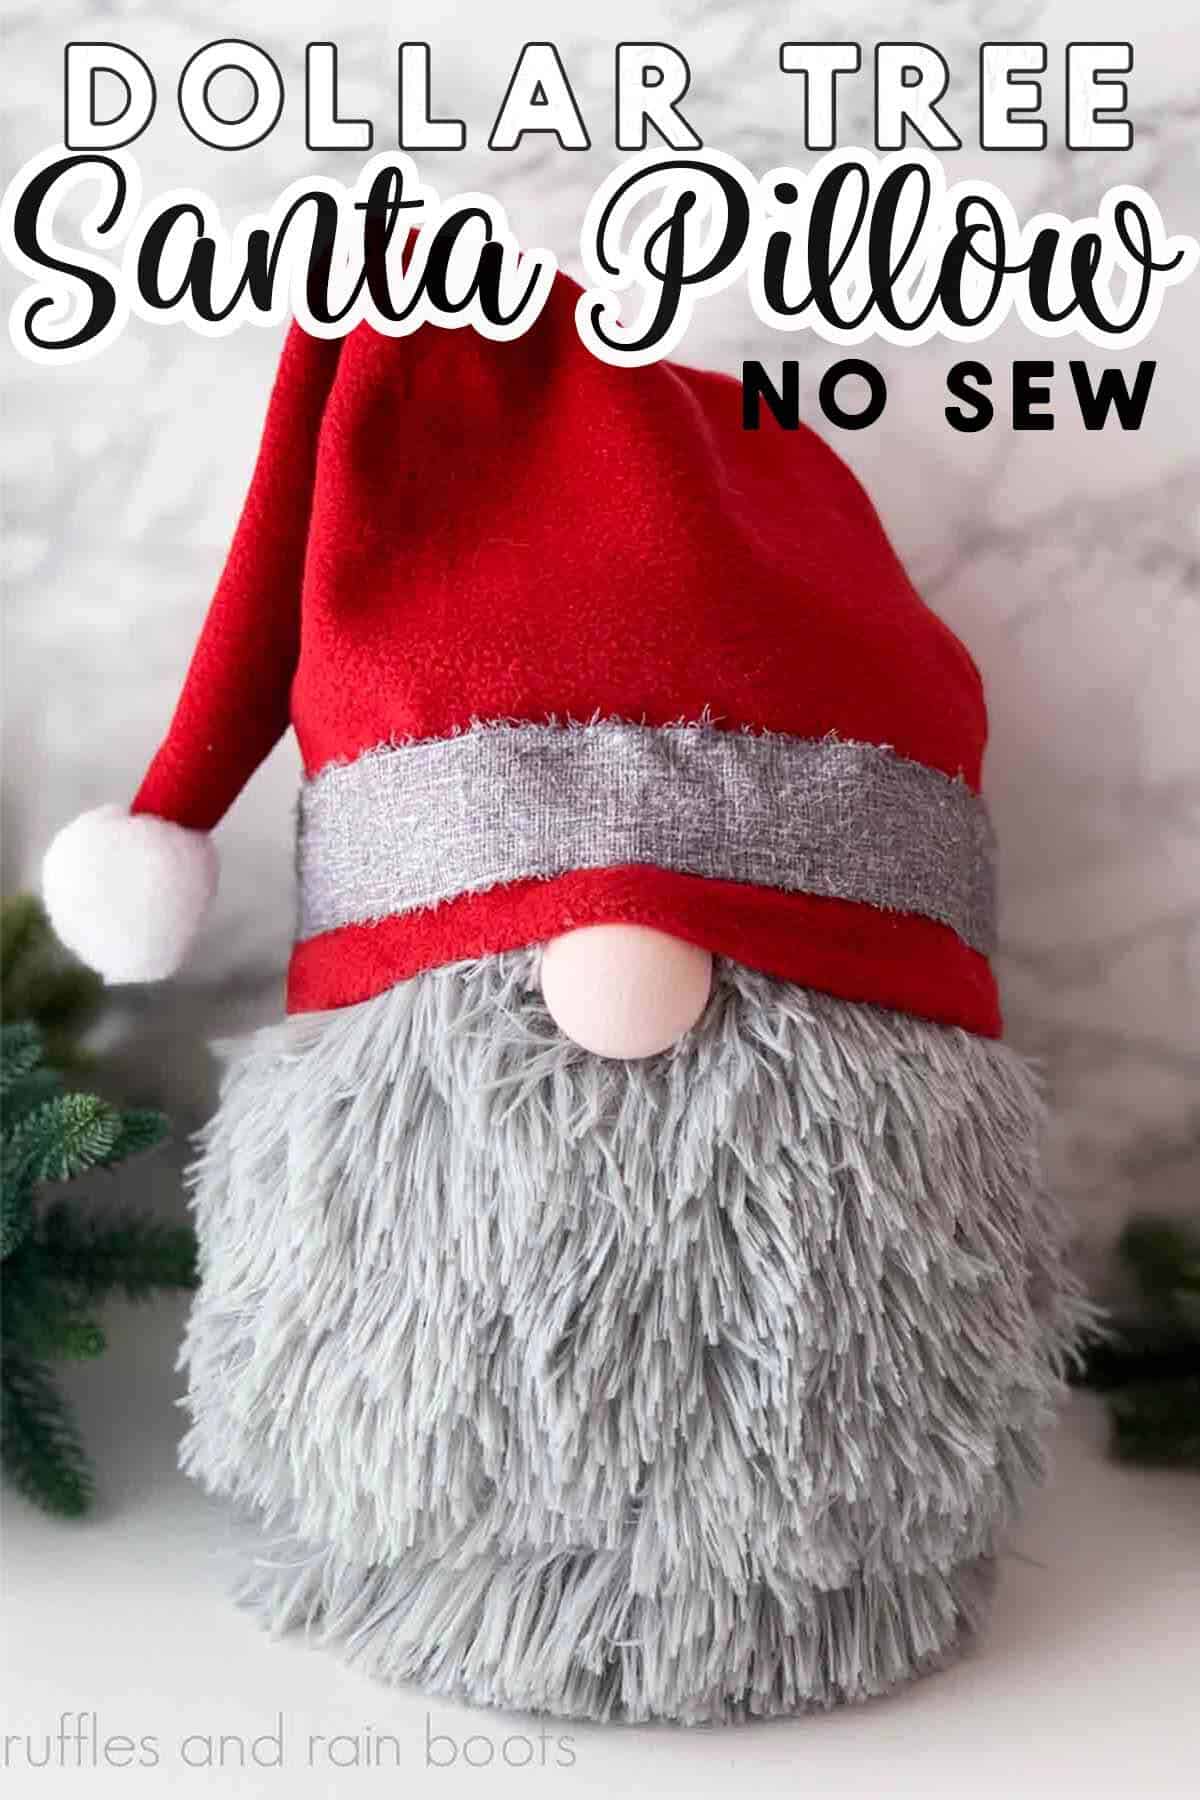 Vertical image of gray bearded gnome with red hat with text which reads Dollar Tree Santa pillow no sew.